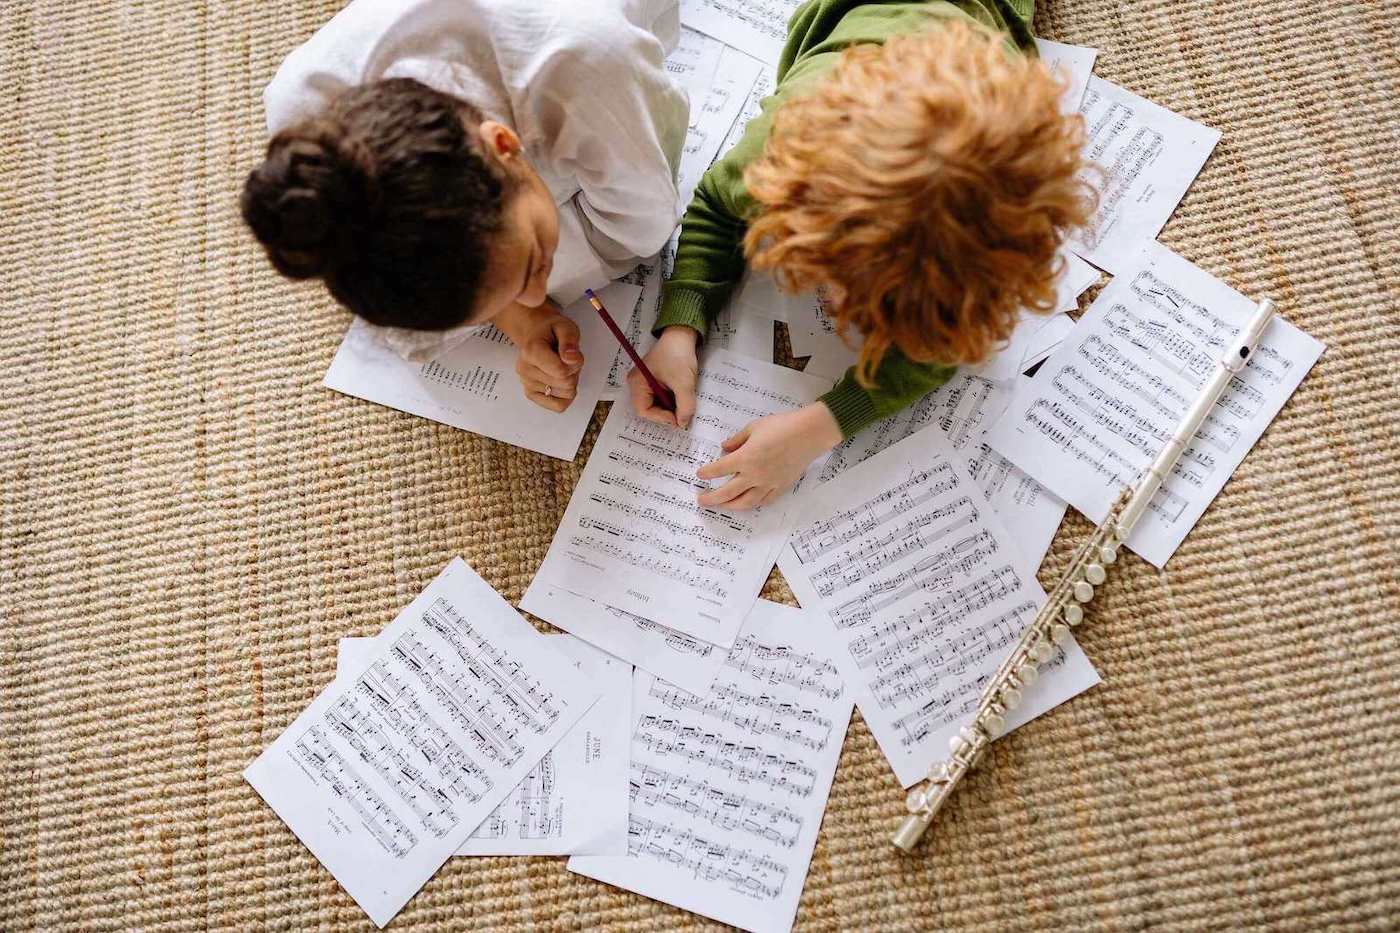 music teacher and the music student learning musical notes at home